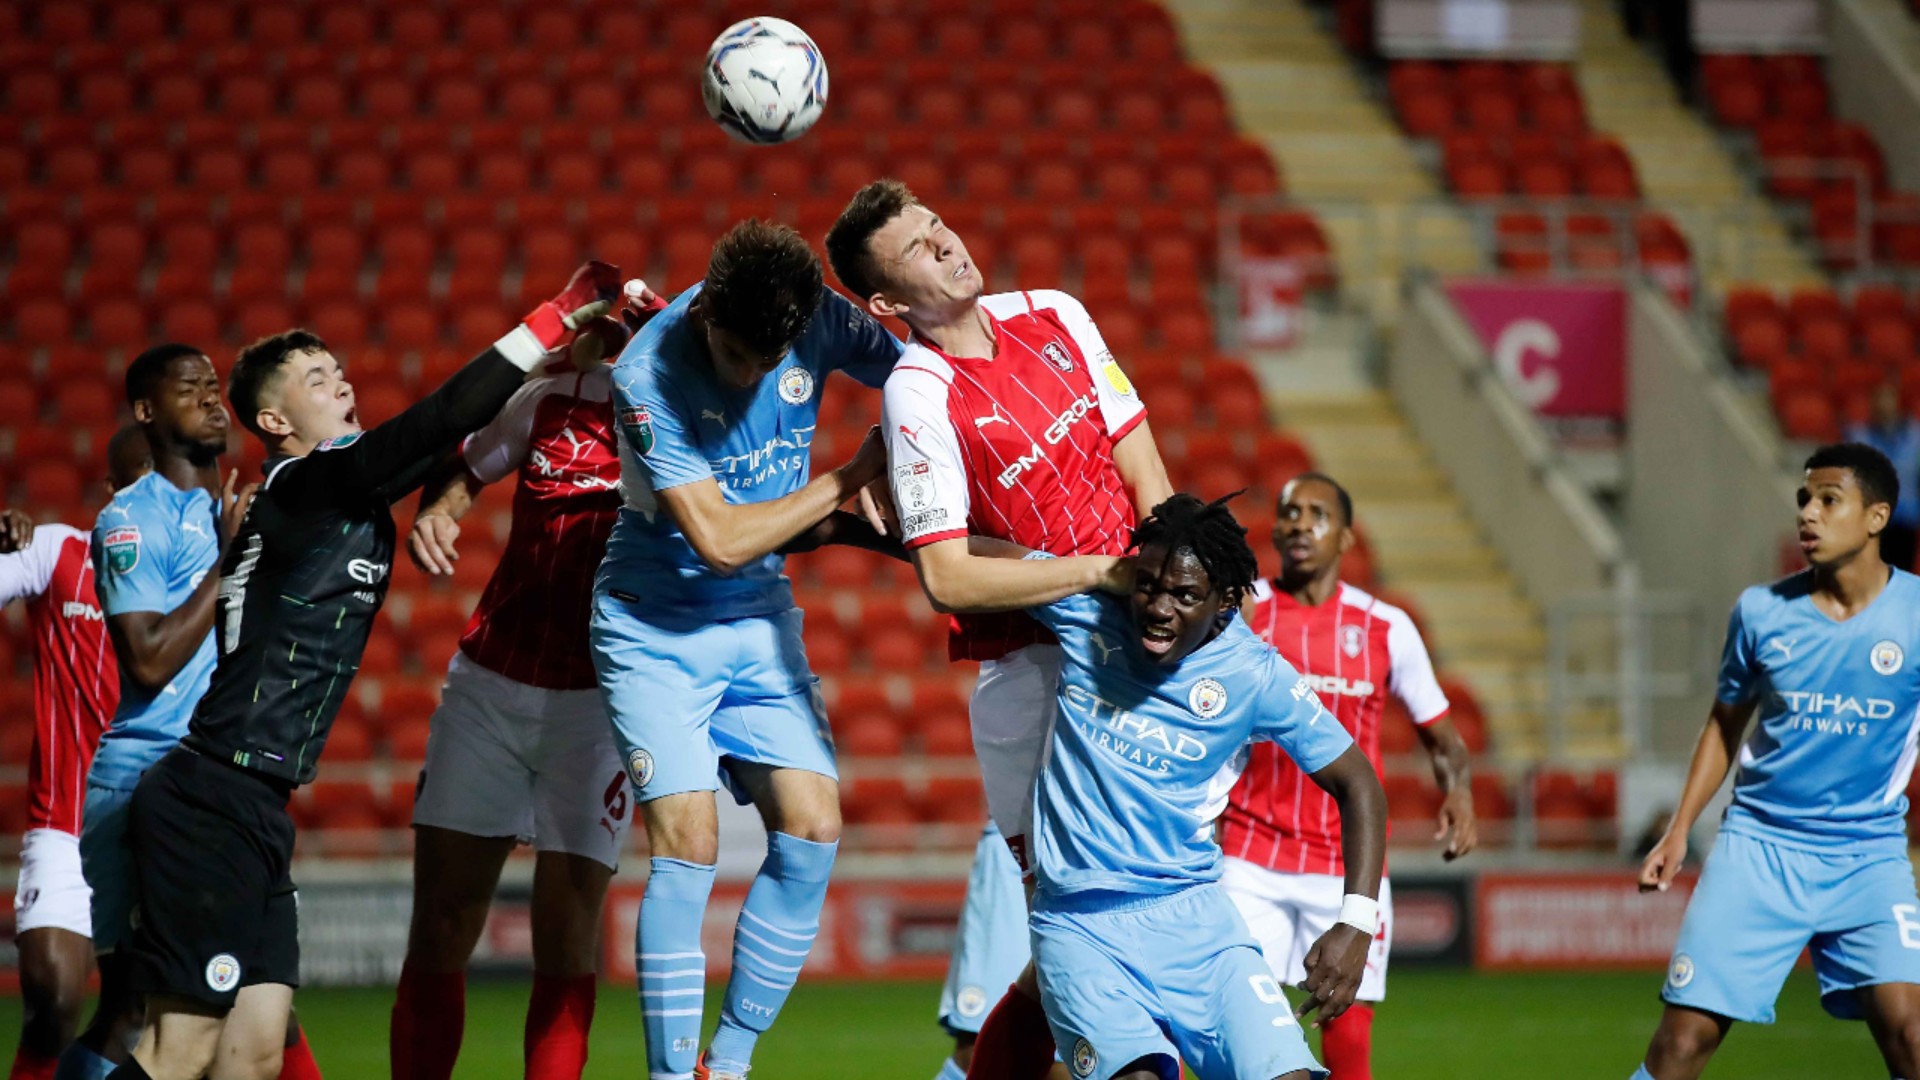 ACTION STATIONS: City defend a Rotherham corner